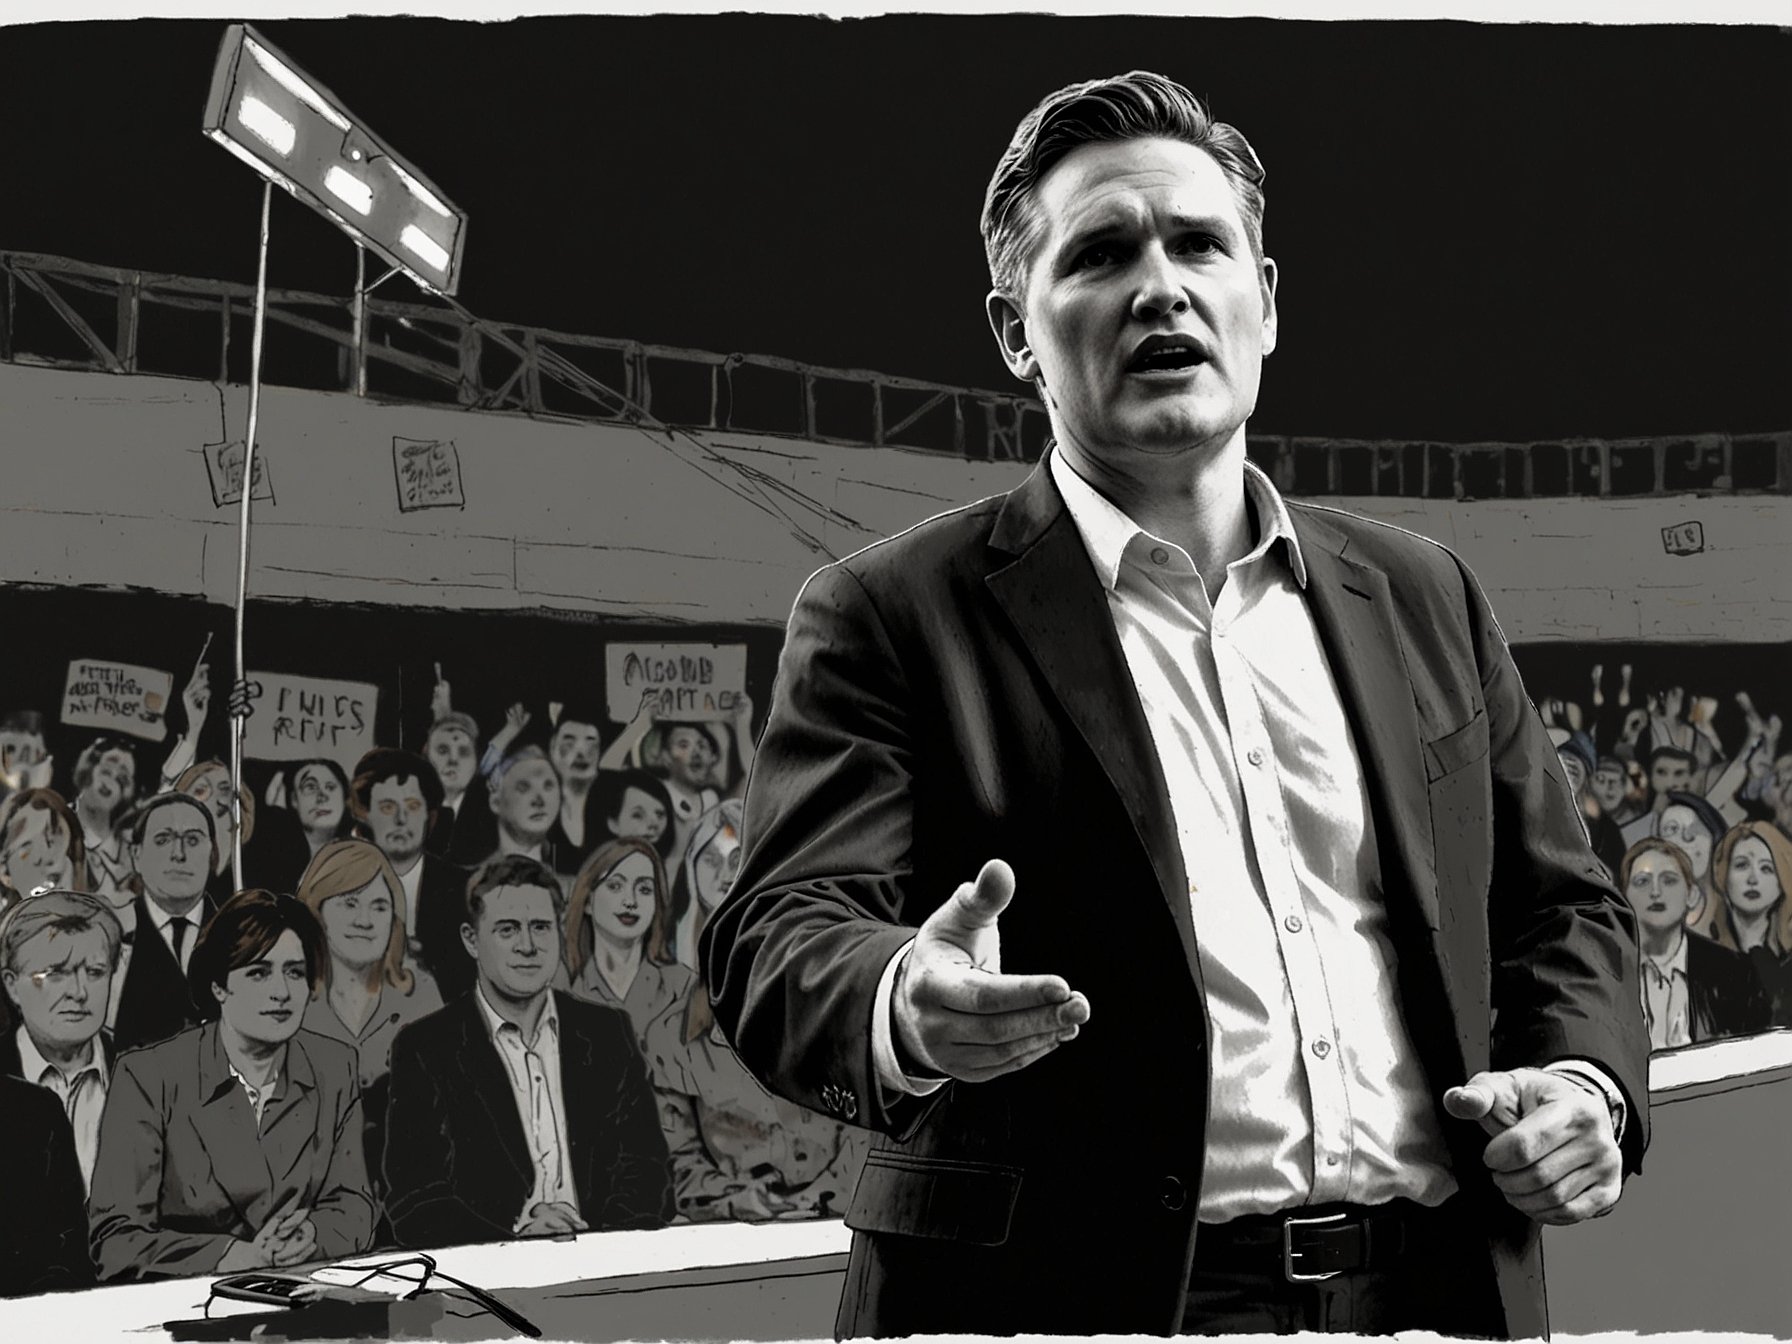 Keir Starmer speaking passionately at a Labour Party rally, symbolizing his determined quest for consecutive General Election victories and a Labour renaissance.